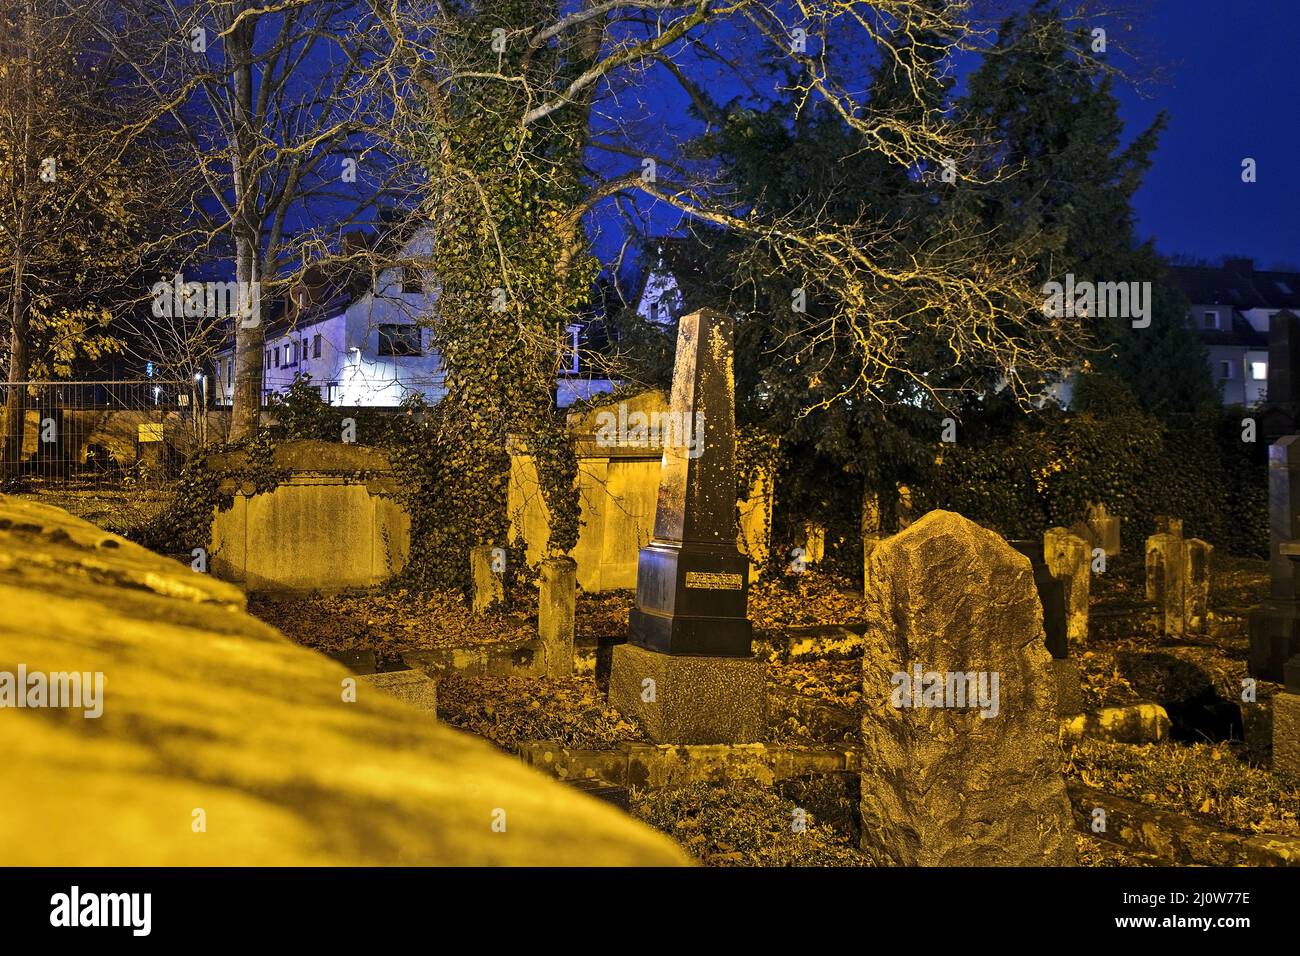 Jewish cemetery at night, in the background Residential buildings, Goettingen, Germany, Europe Stock Photo